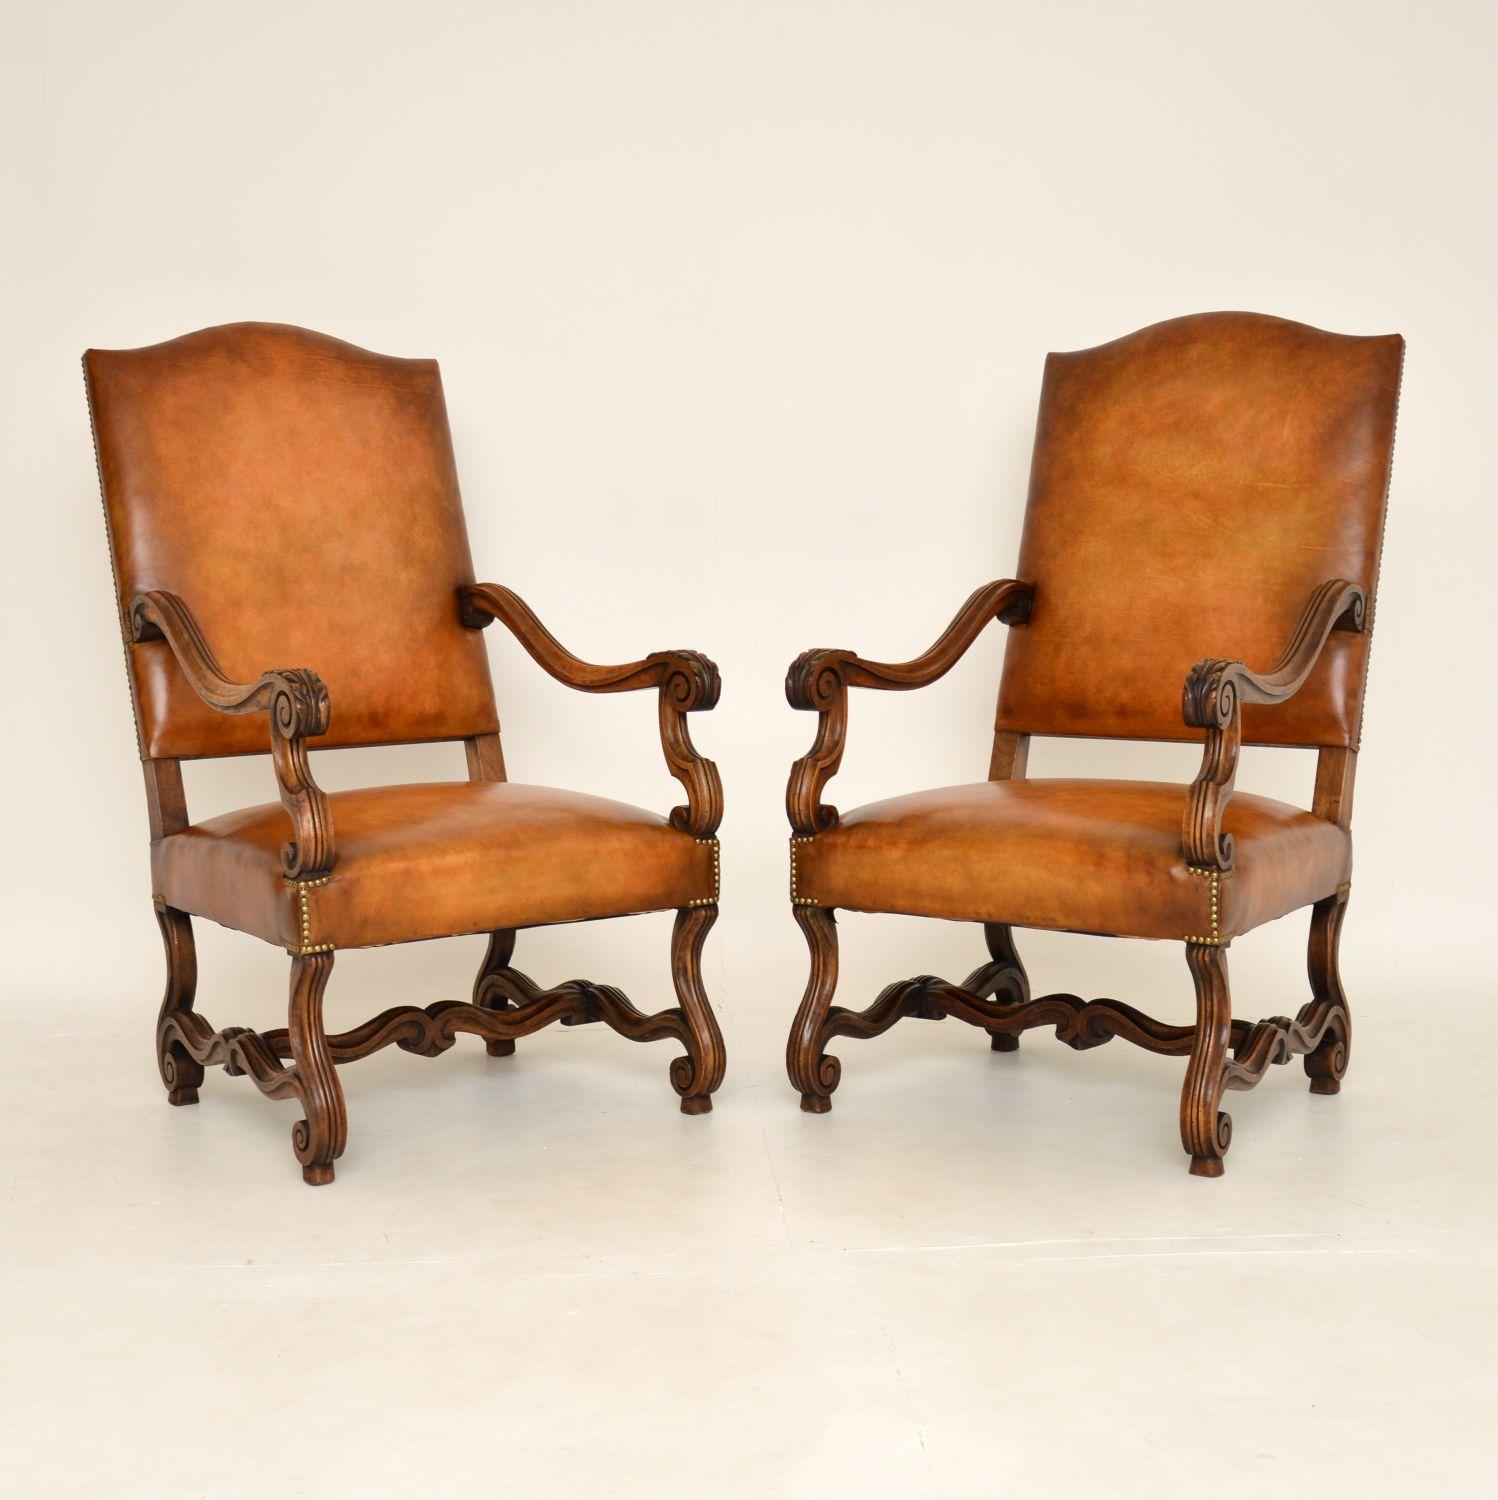 A superb pair of antique Swedish armchairs in solid walnut and leather. They are in the antique Carolean style, and they date from around the 1880-1900 period.

They are of amazing quality, and have a stunning design. The scroll over arms have